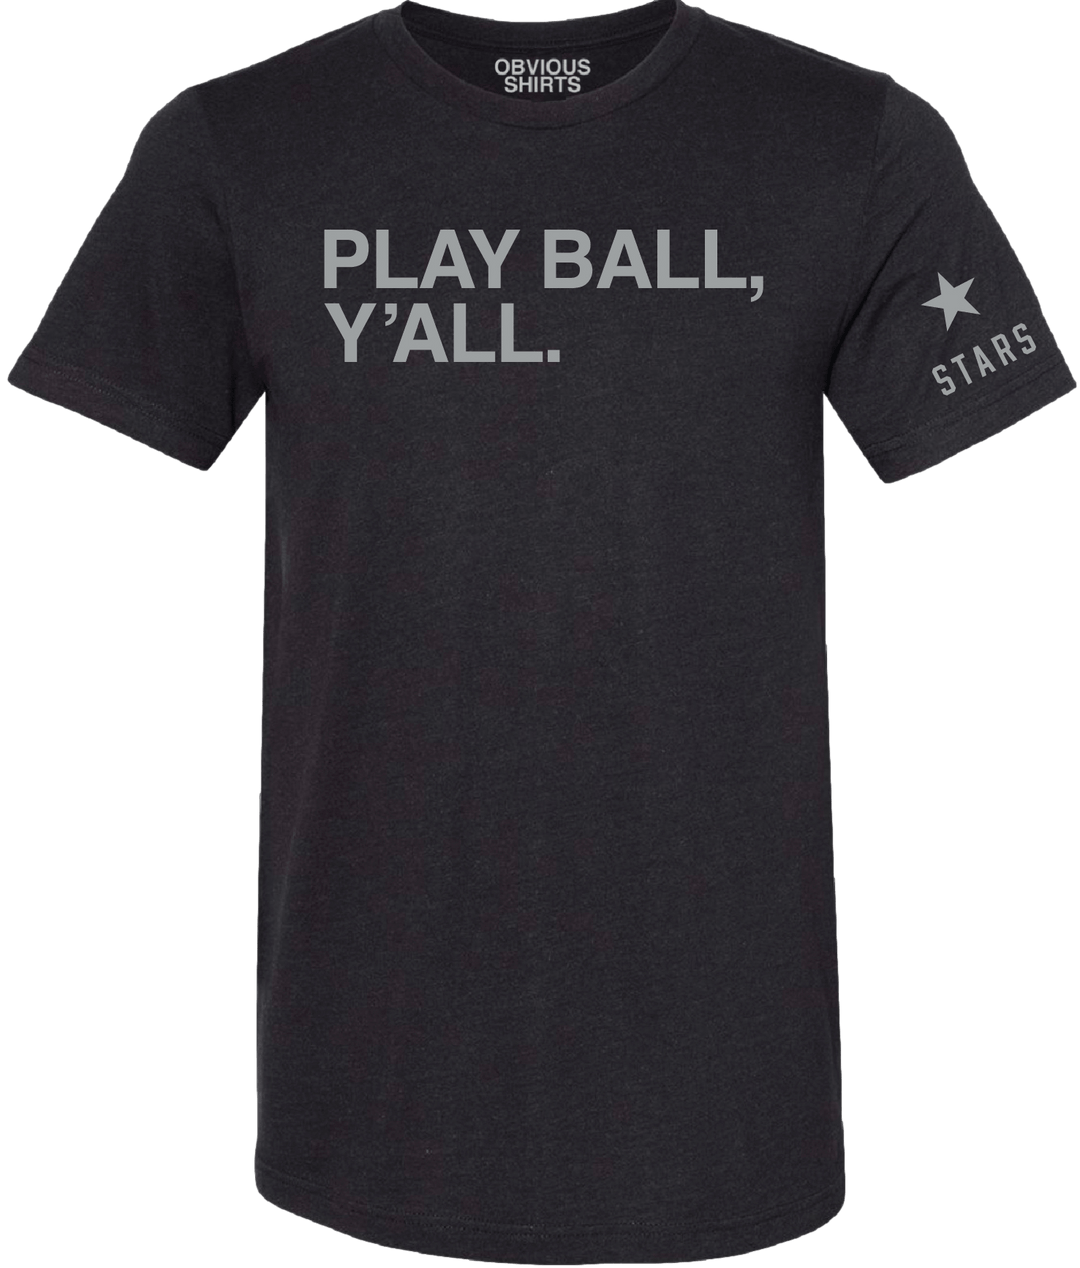 PLAY BALL, Y'ALL. (BLACK) - OBVIOUS SHIRTS